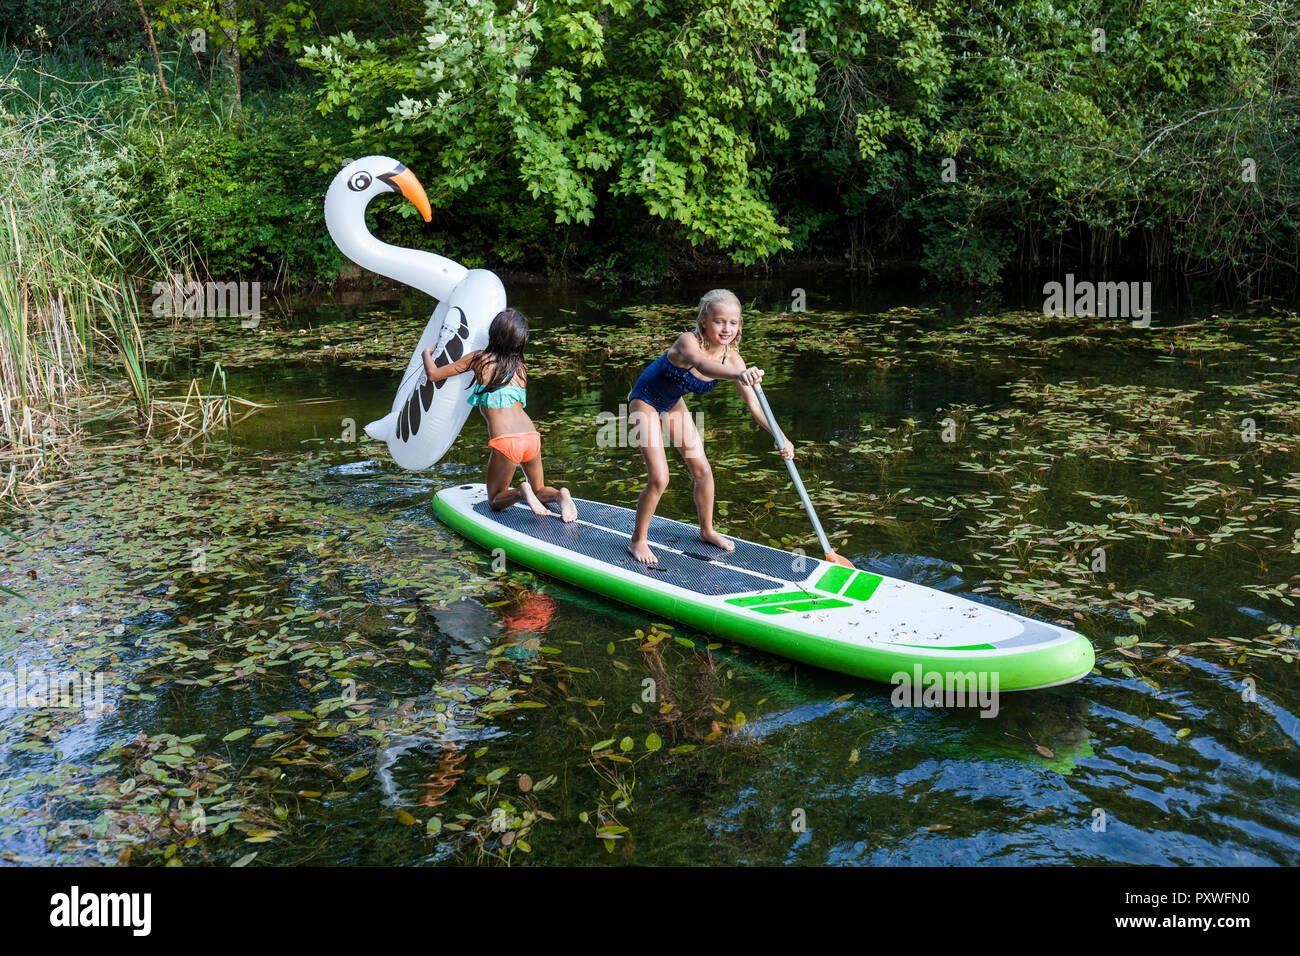 Two girls in a pond with inflatable pool toy in swan shape and SUP board Stock Photo